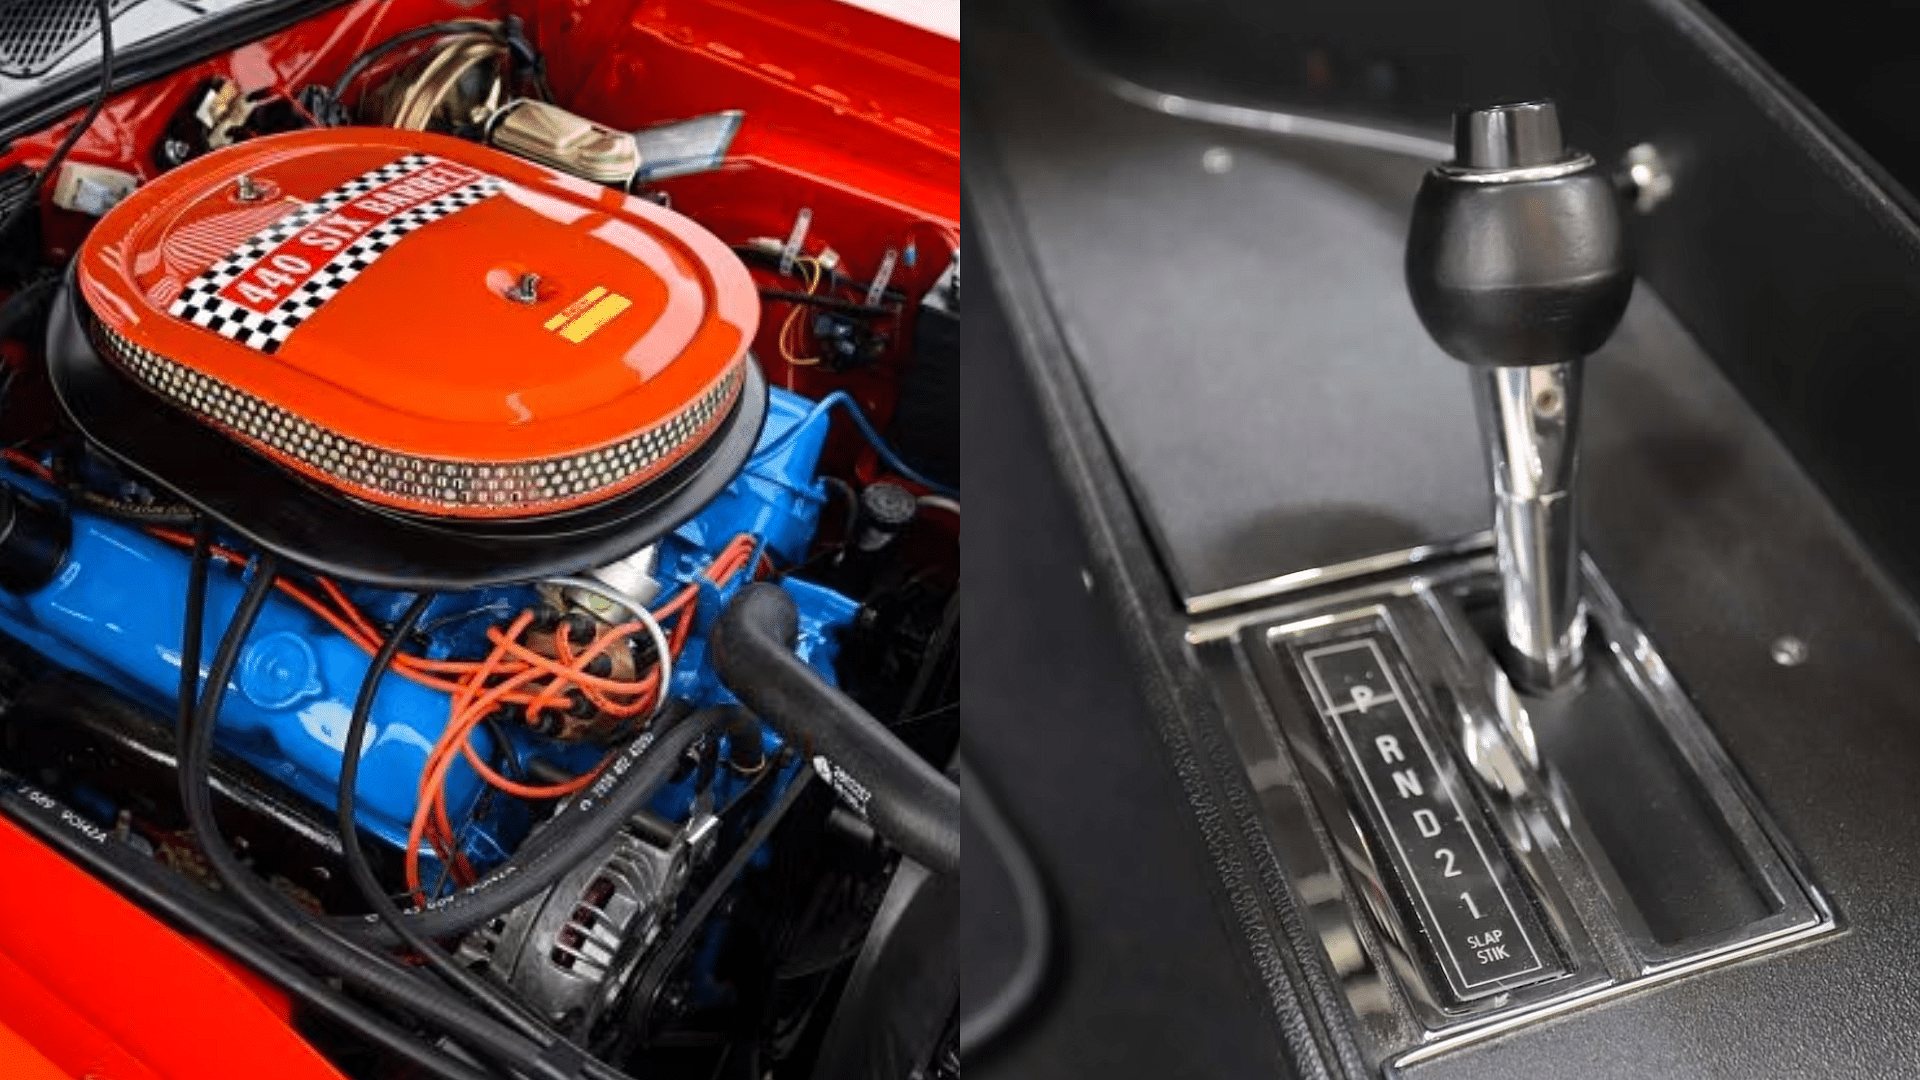 1972 Plymouth Road Runner Engine and gear stick